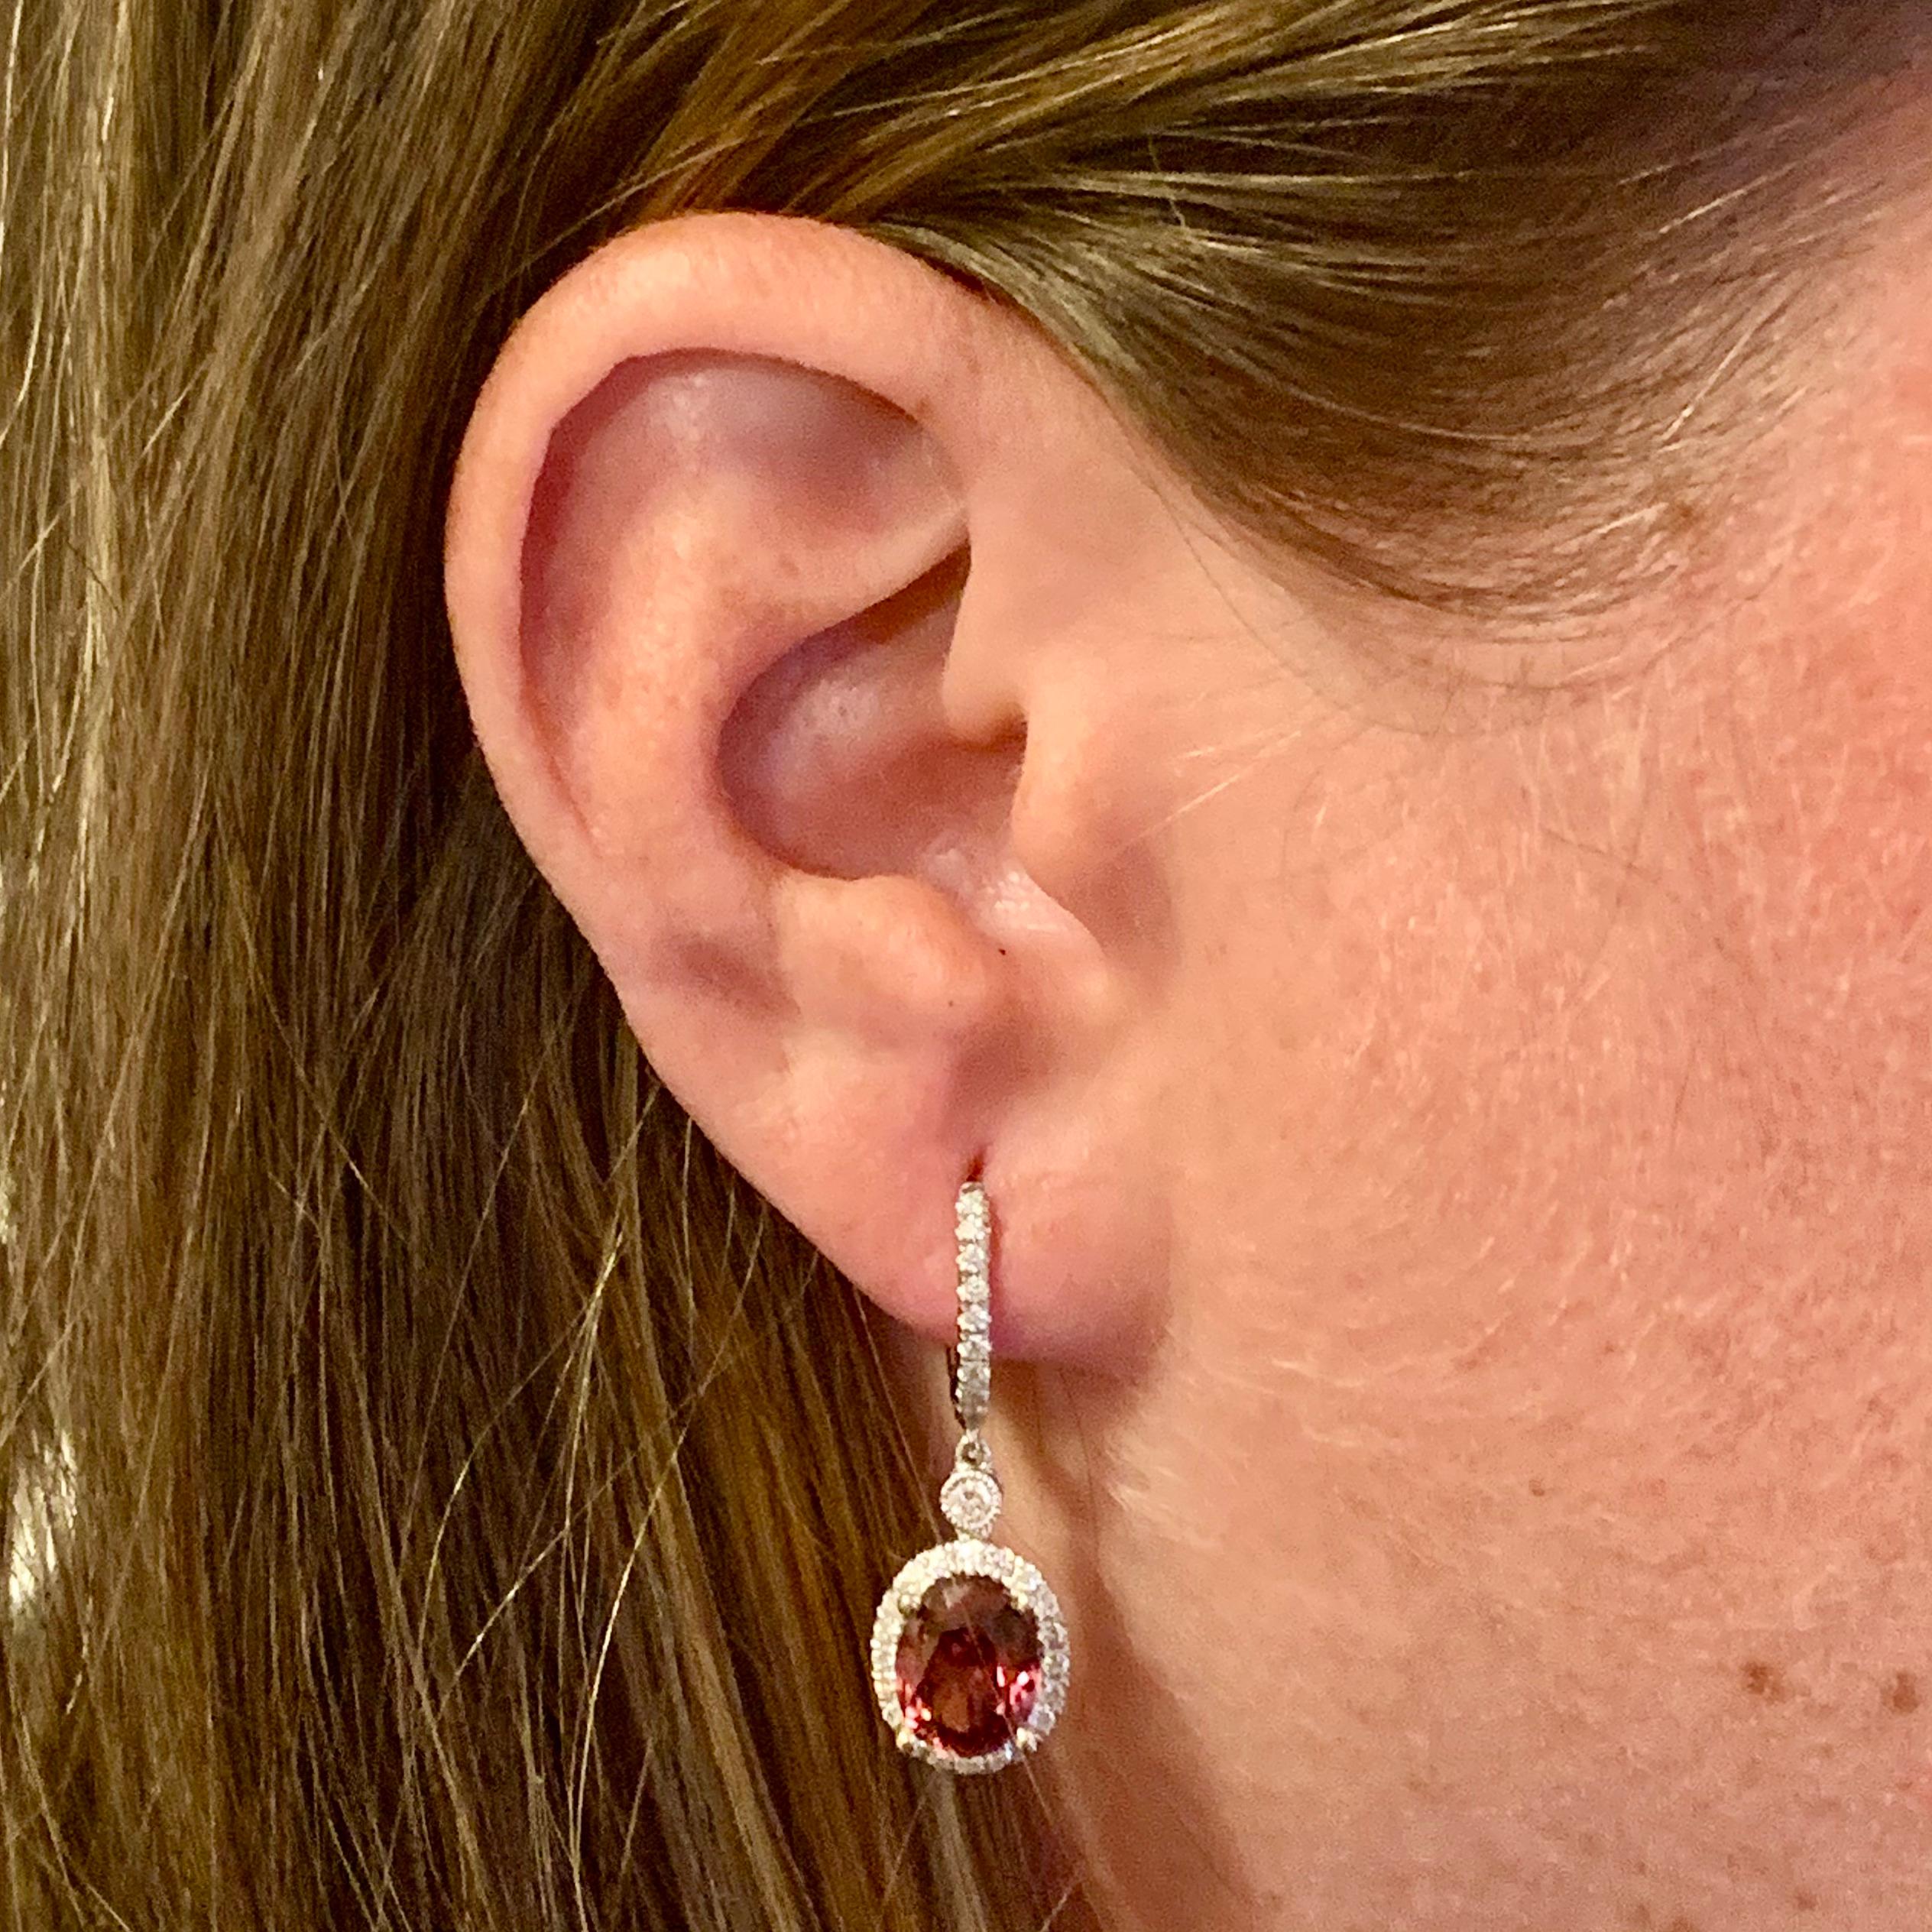 Natural Finely Faceted Quality Rubellite Tourmaline Diamond Earrings 18k Gold 6.62 TCW Certified $6,950 017705

This is a Unique Custom Made Glamorous Piece of Jewelry!

Nothing says, “I Love you” more than Diamonds and Pearls!

This pair of